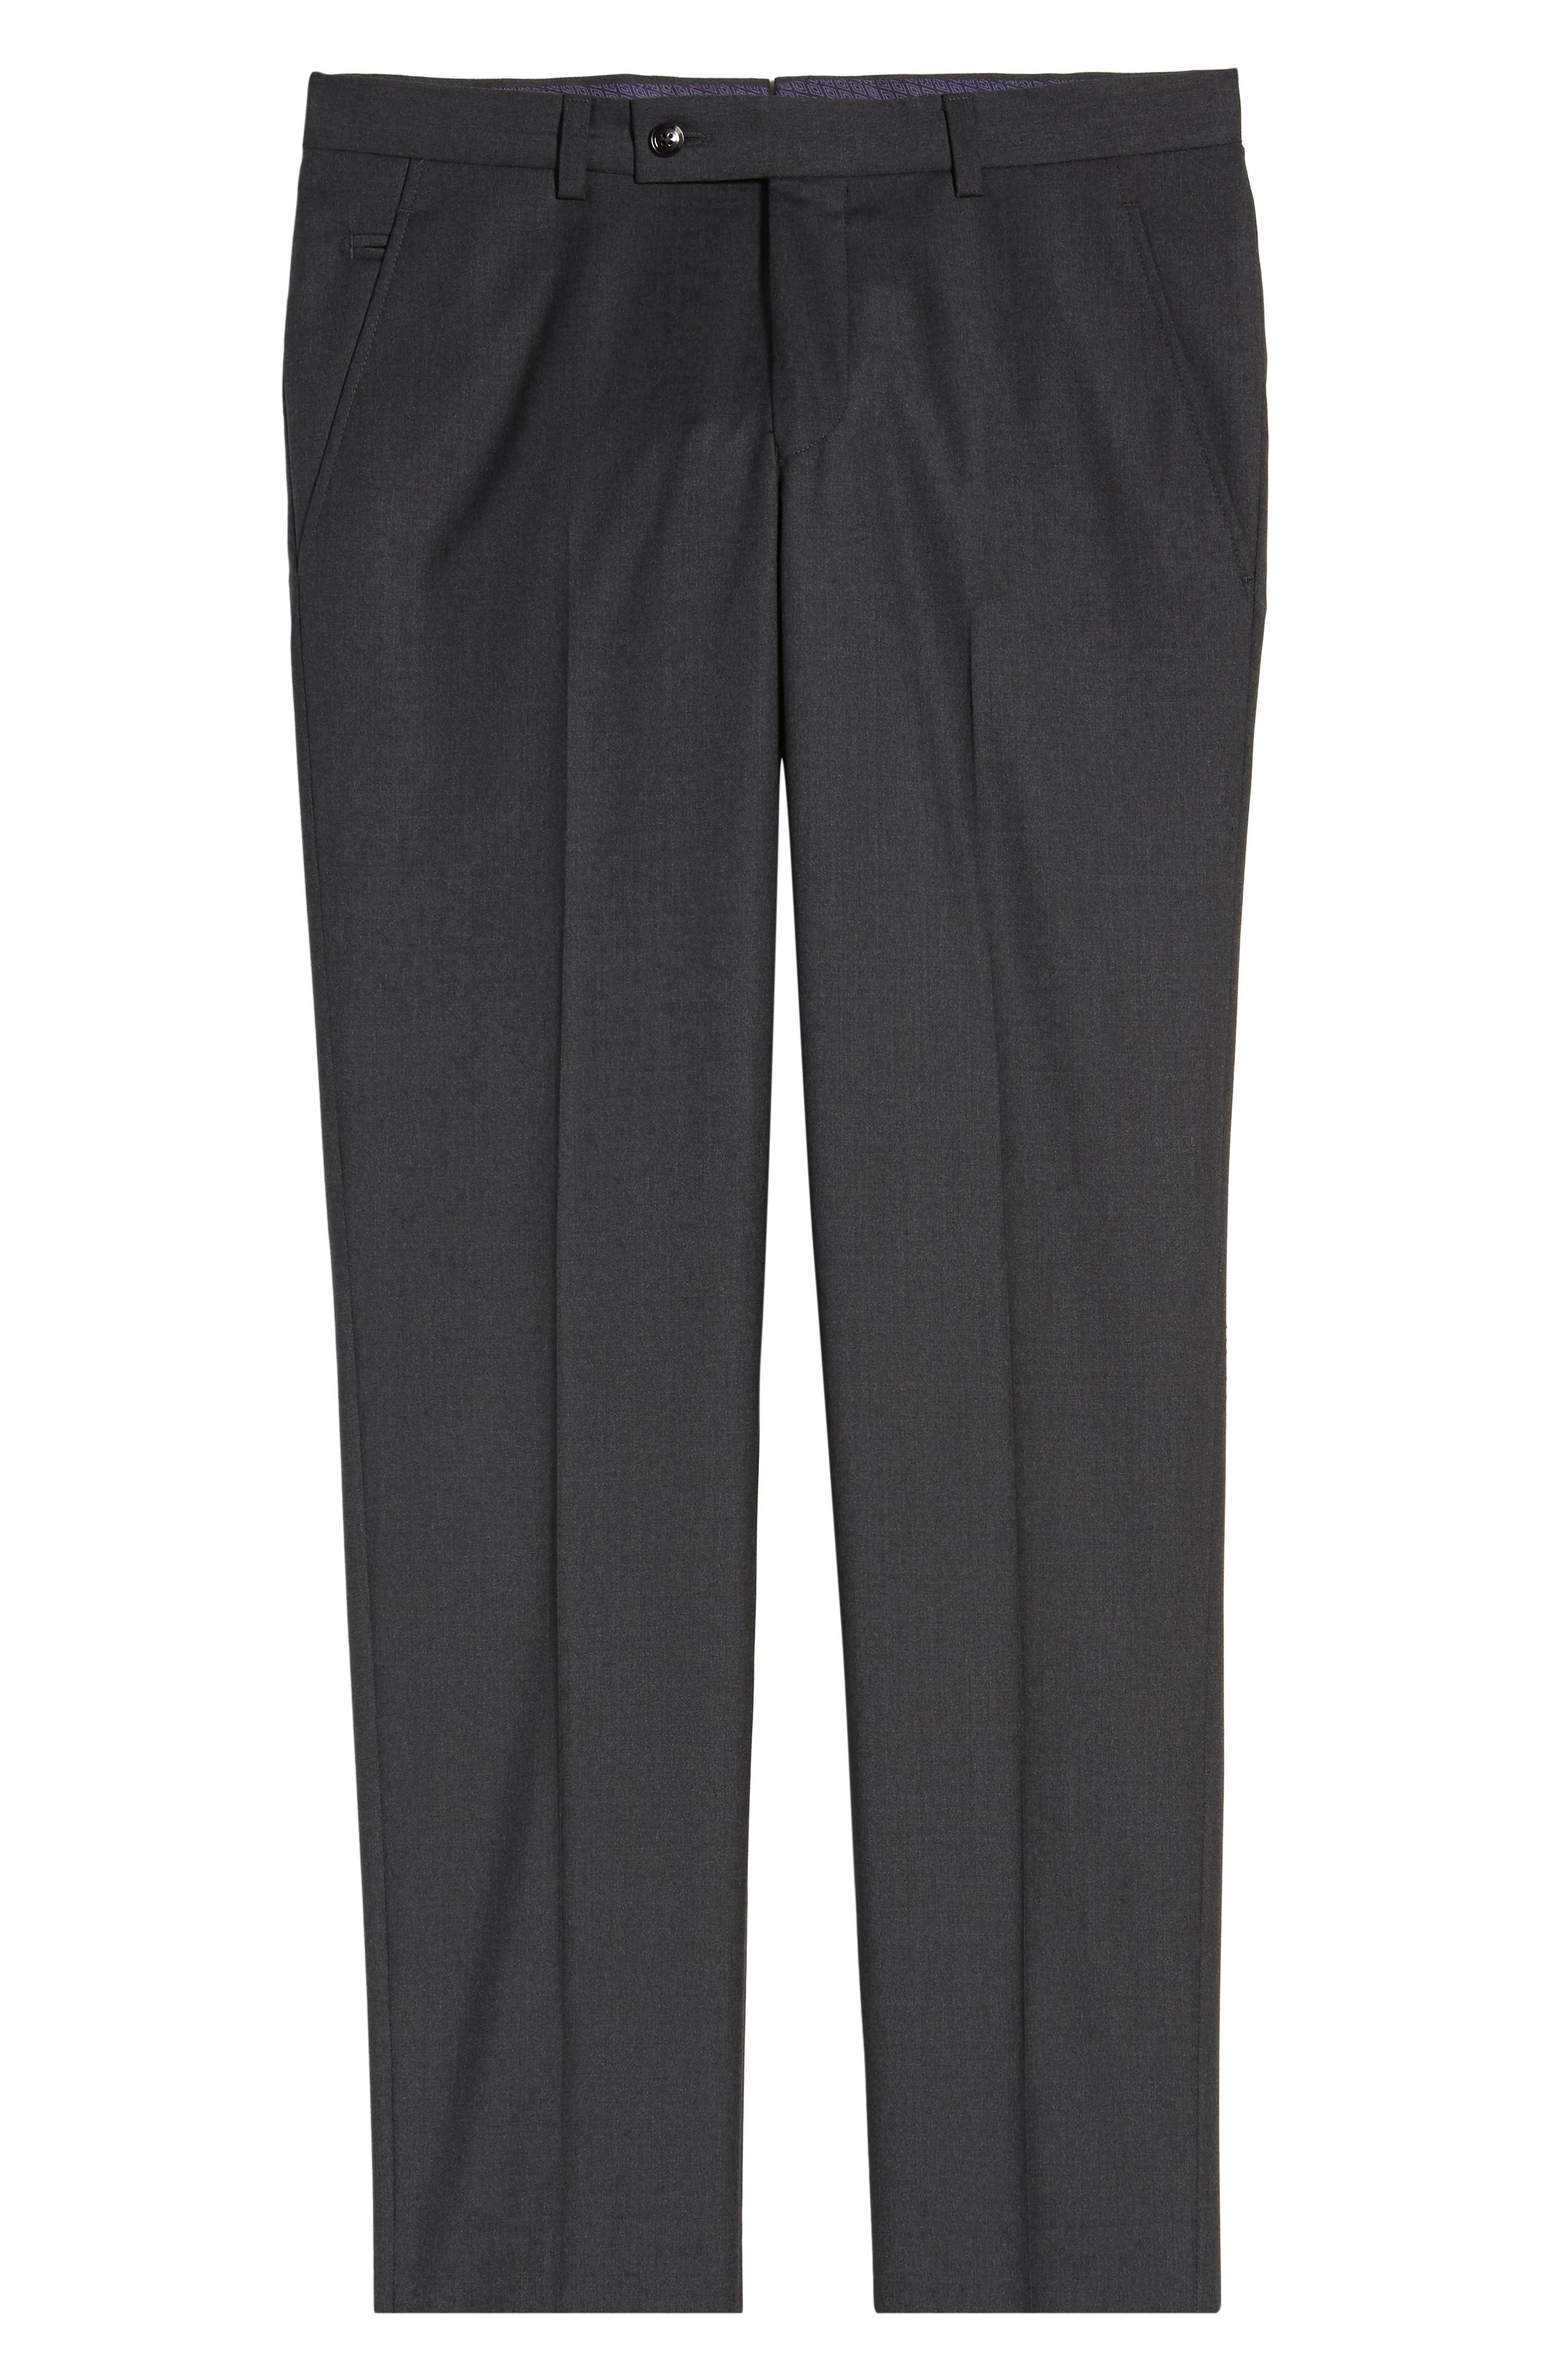 Ted Baker London | Jerome Flat Front Solid Wool Dress Pants | Nordstrom ...